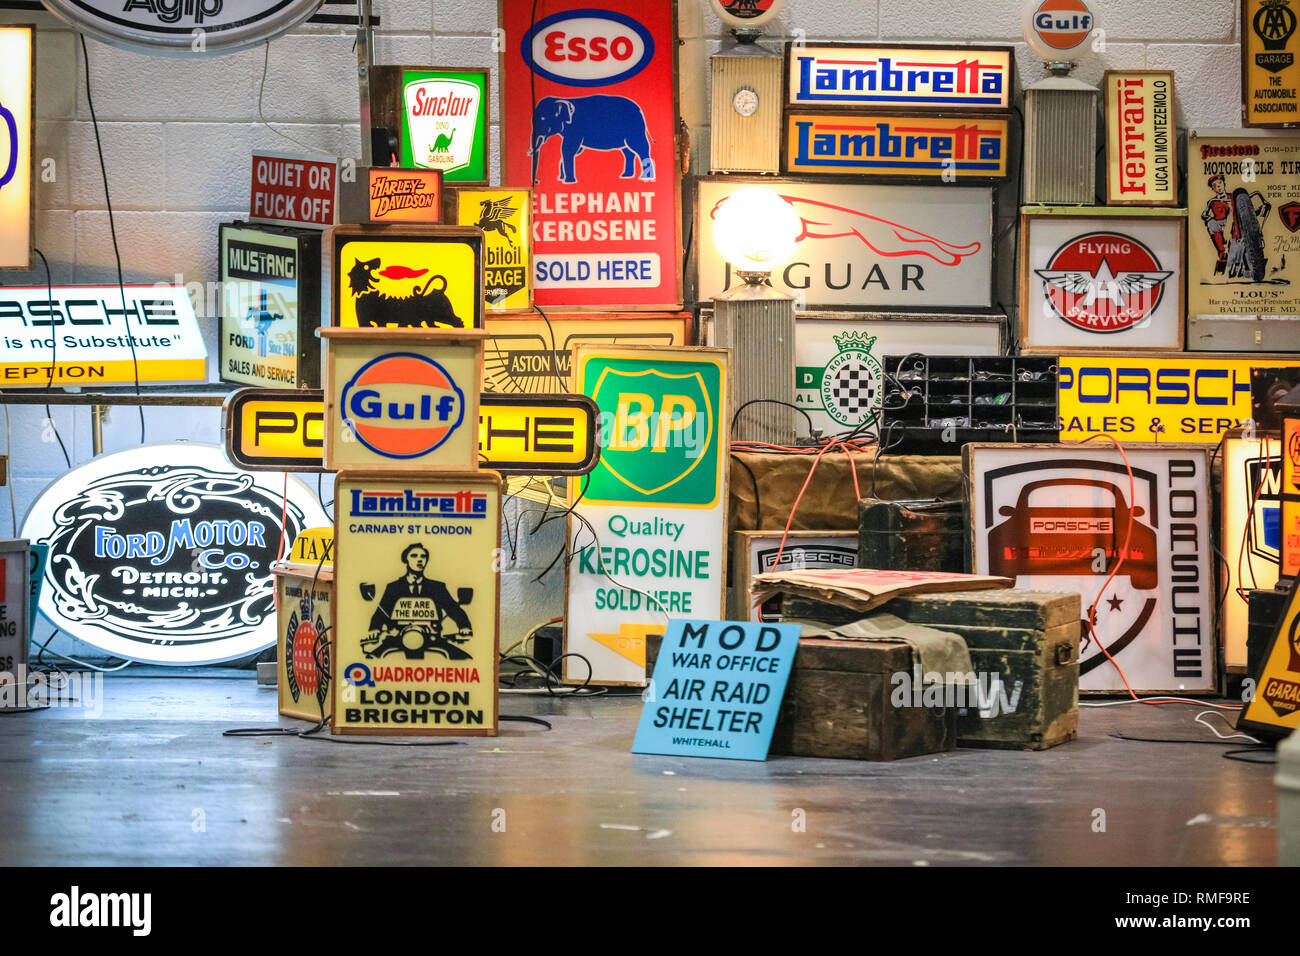 ExCel, London, UK, 14th Feb 2019. Illuminated car and petrol station signs.The London Classic Car Show 2019 opens at ExCel Exhibition Centre in London Docklands. The show  brings together classic car owners, collectors, experts and enthusiast with dealers, manufacturers and car clubs in a celebration of motoring and classic cars. Credit: Imageplotter News and Sports/Alamy Live News Stock Photo